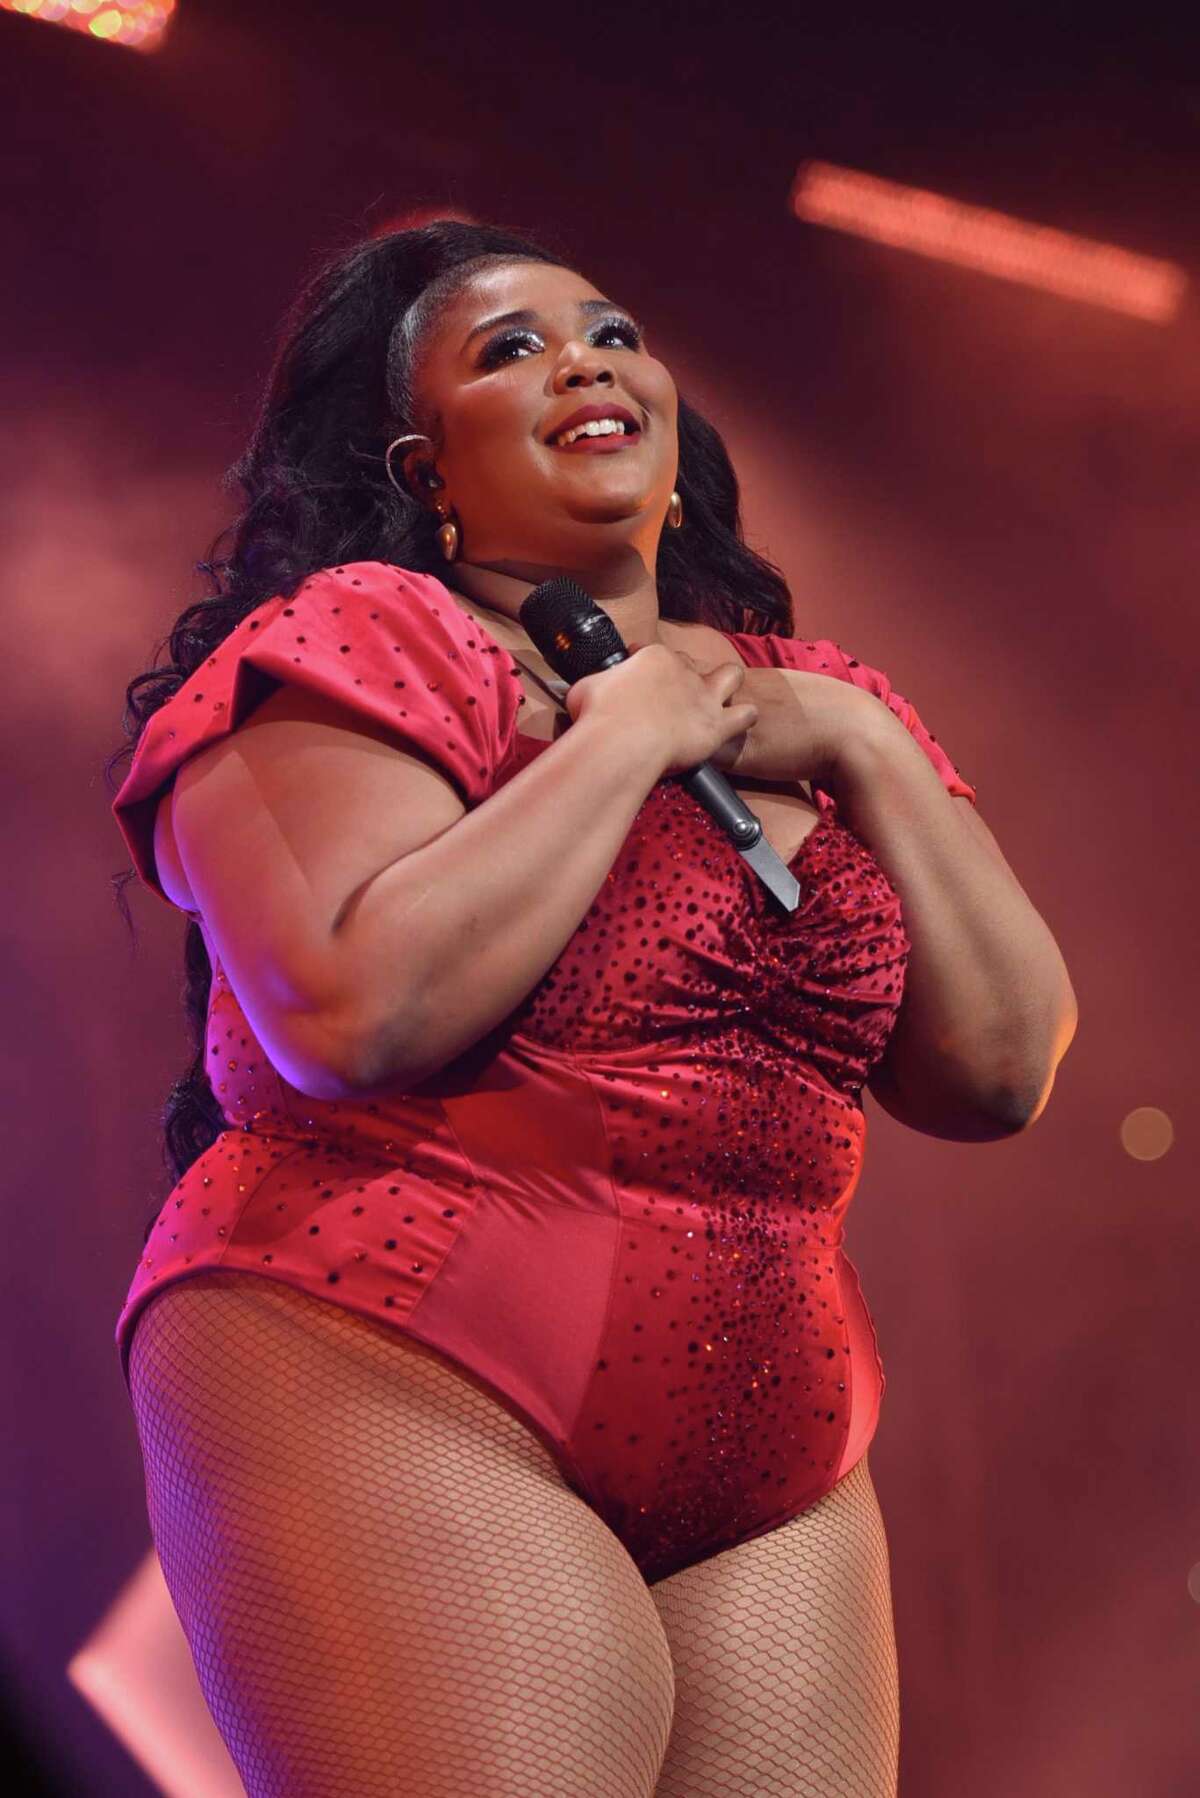 The musician Lizzo is an example of the body positivity’s effectiveness in diversity representation. Yet the movement still focuses on one thing — appearance.